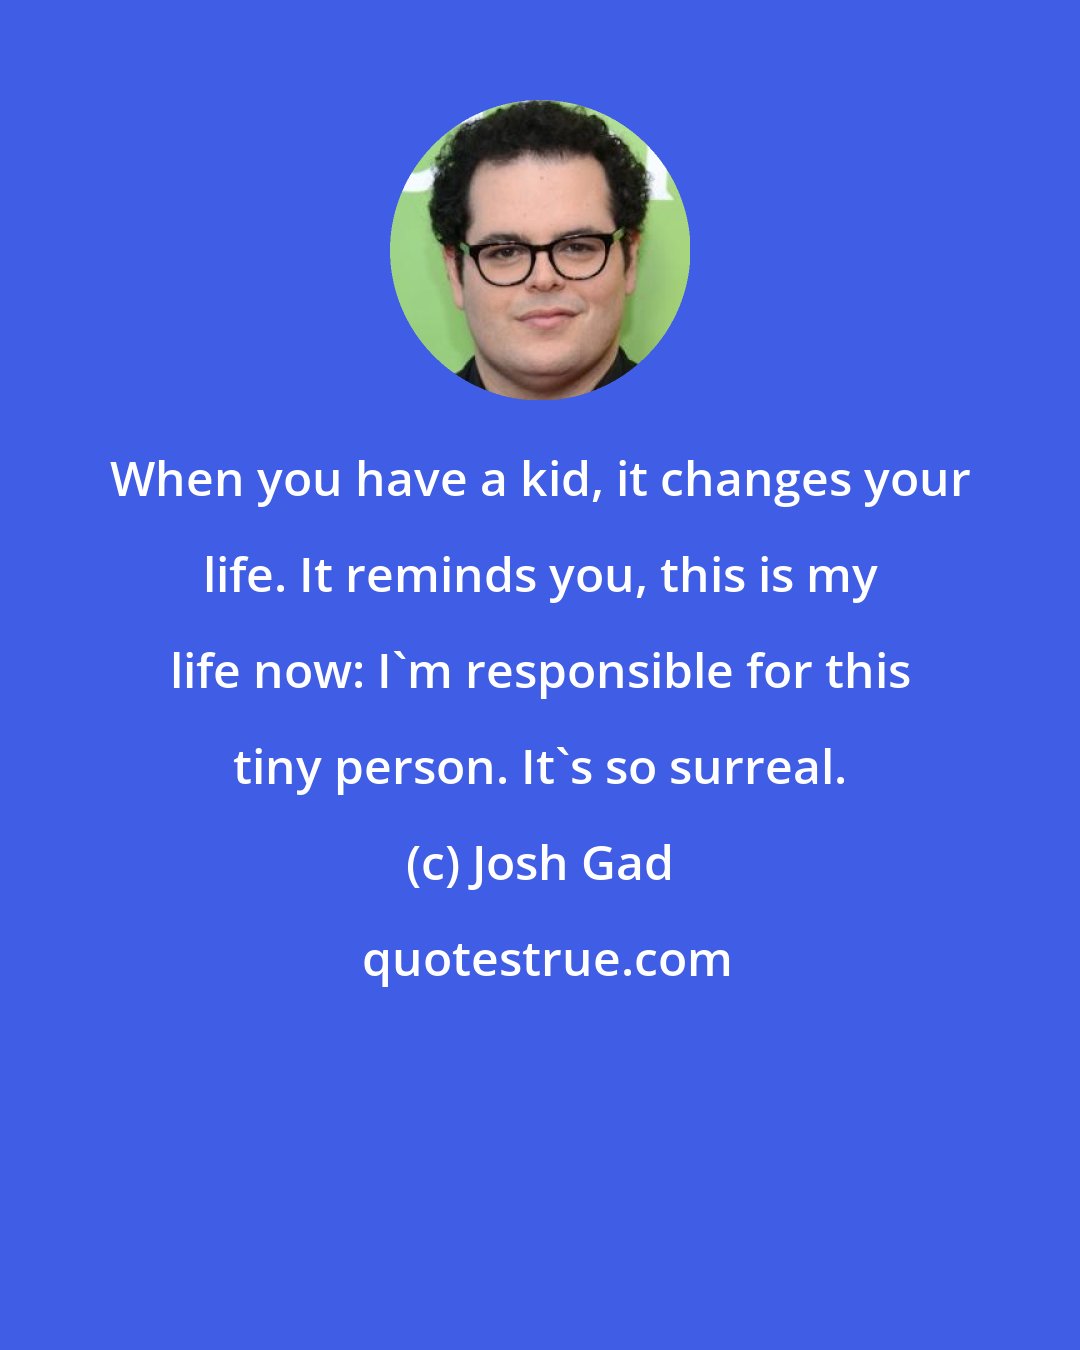 Josh Gad: When you have a kid, it changes your life. It reminds you, this is my life now: I'm responsible for this tiny person. It's so surreal.